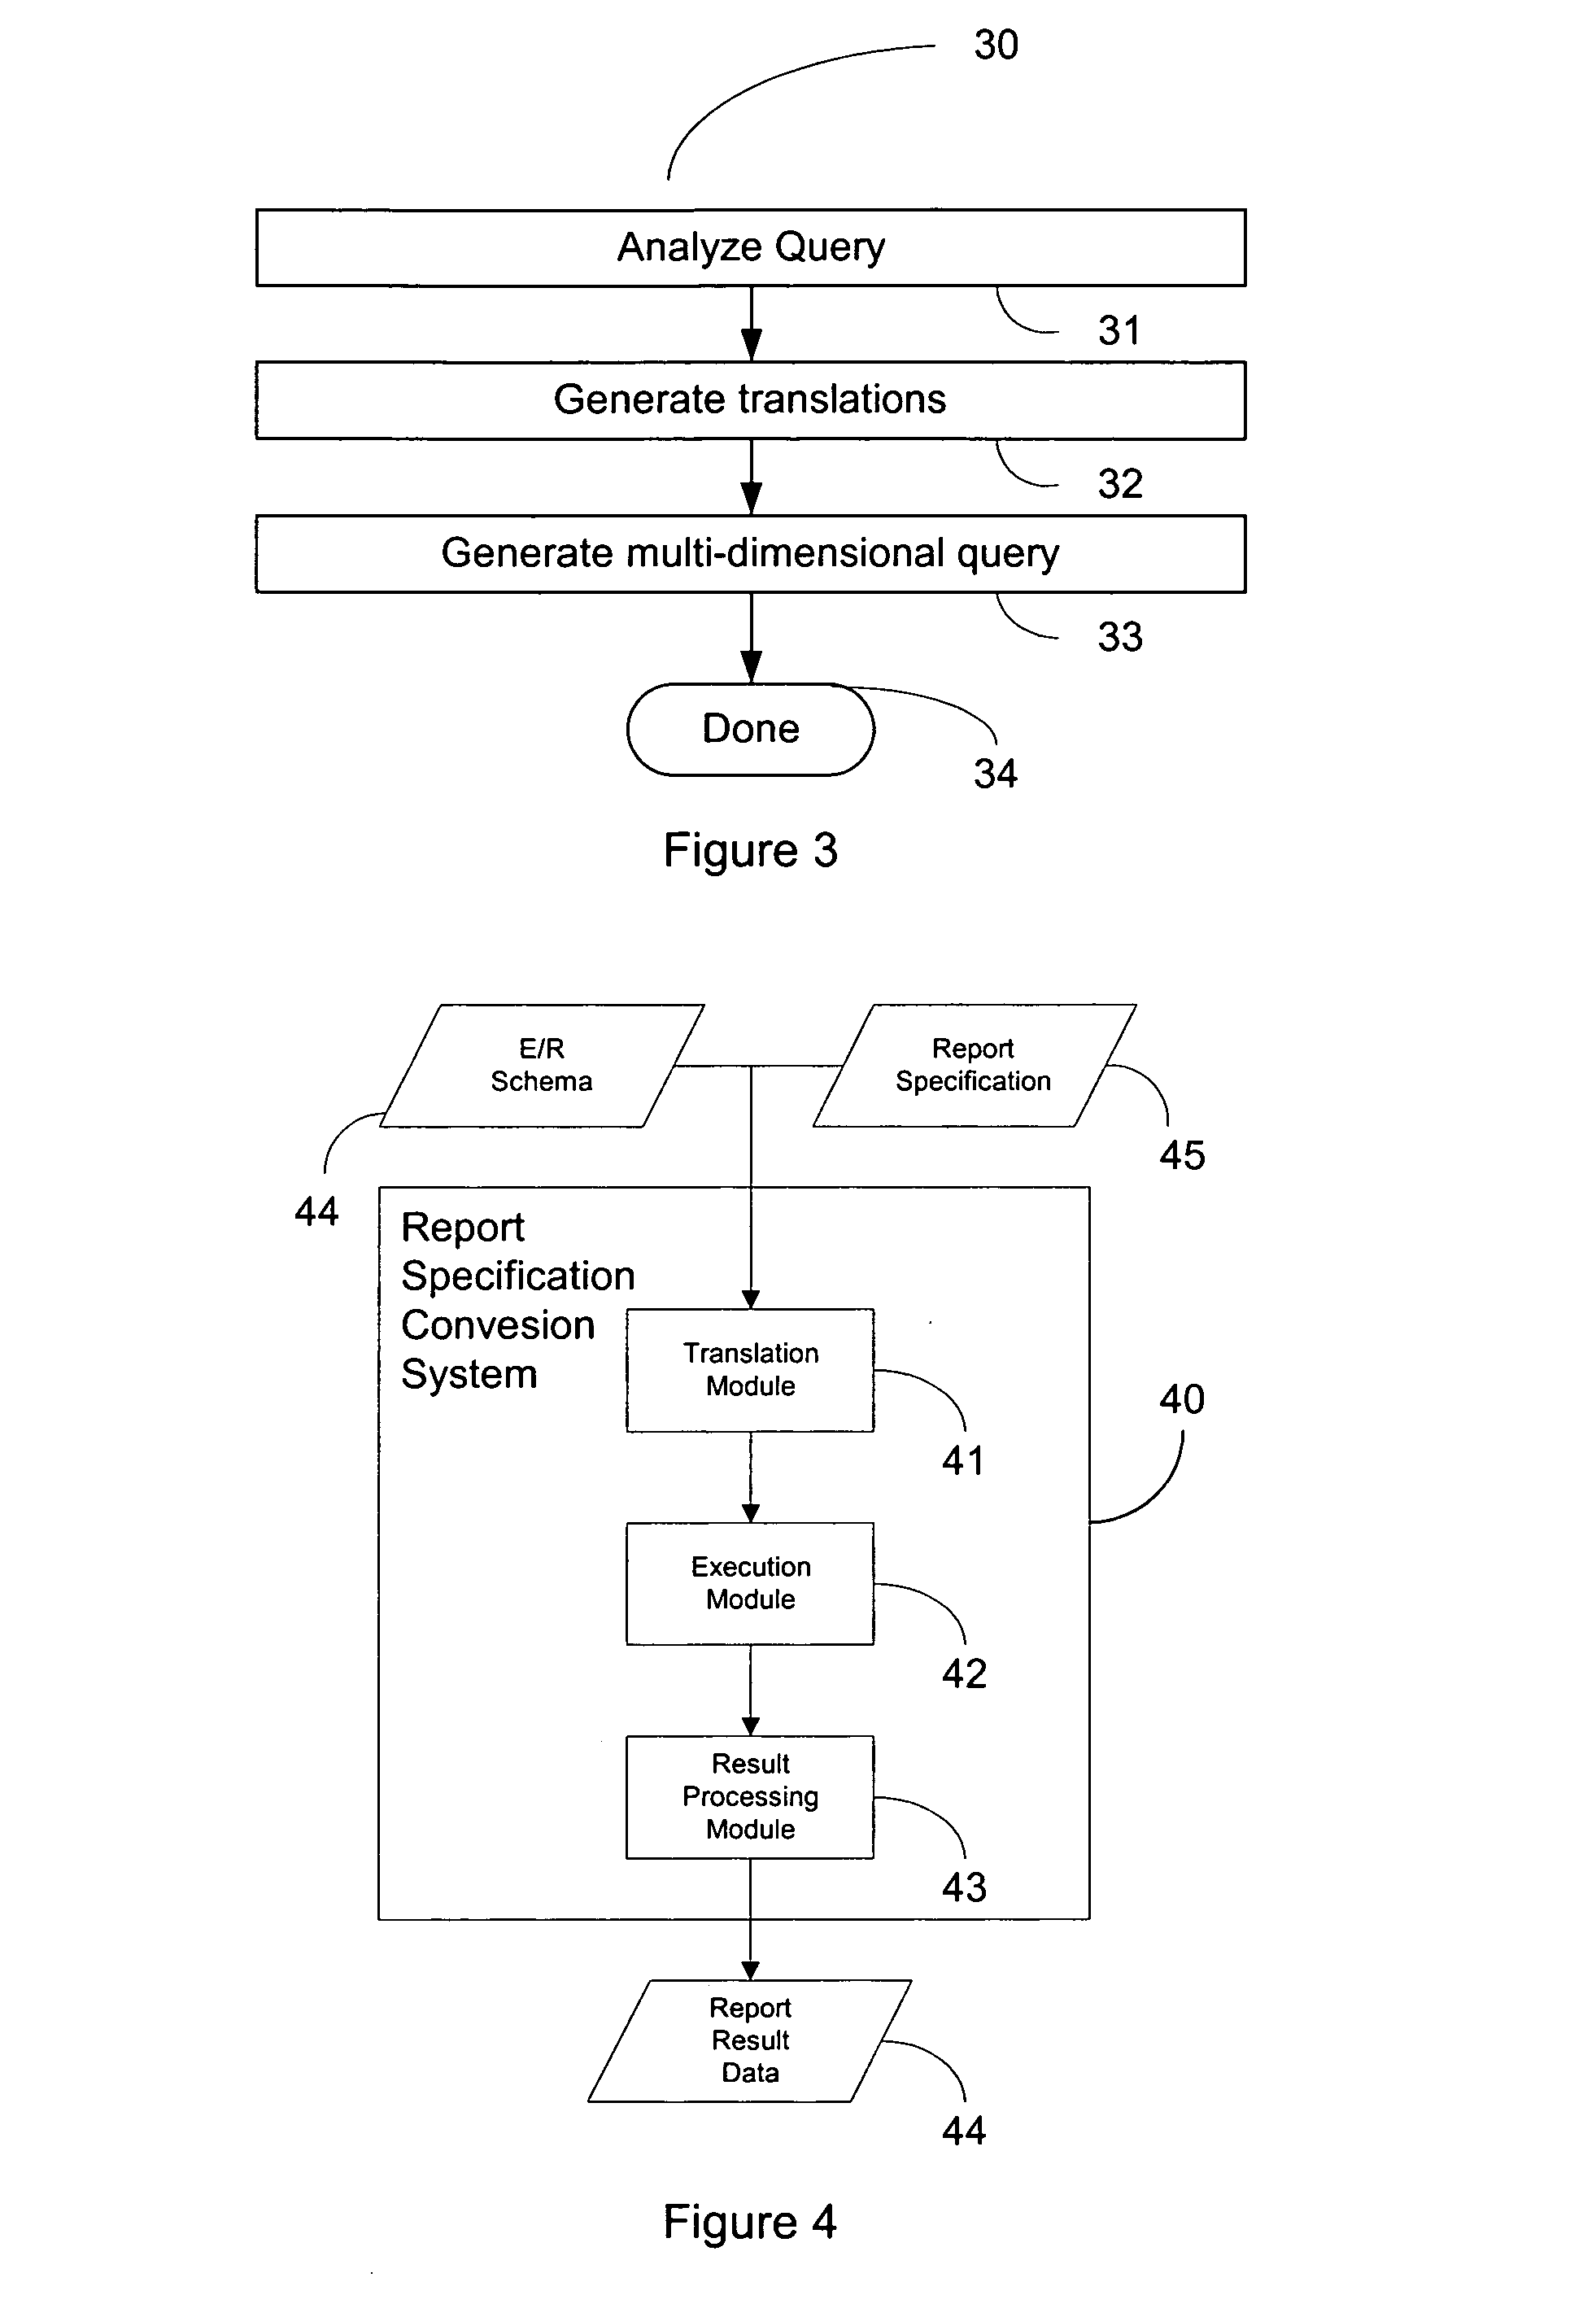 System and method of transforming queries based upon E/R schema into multi-dimensional expression queries